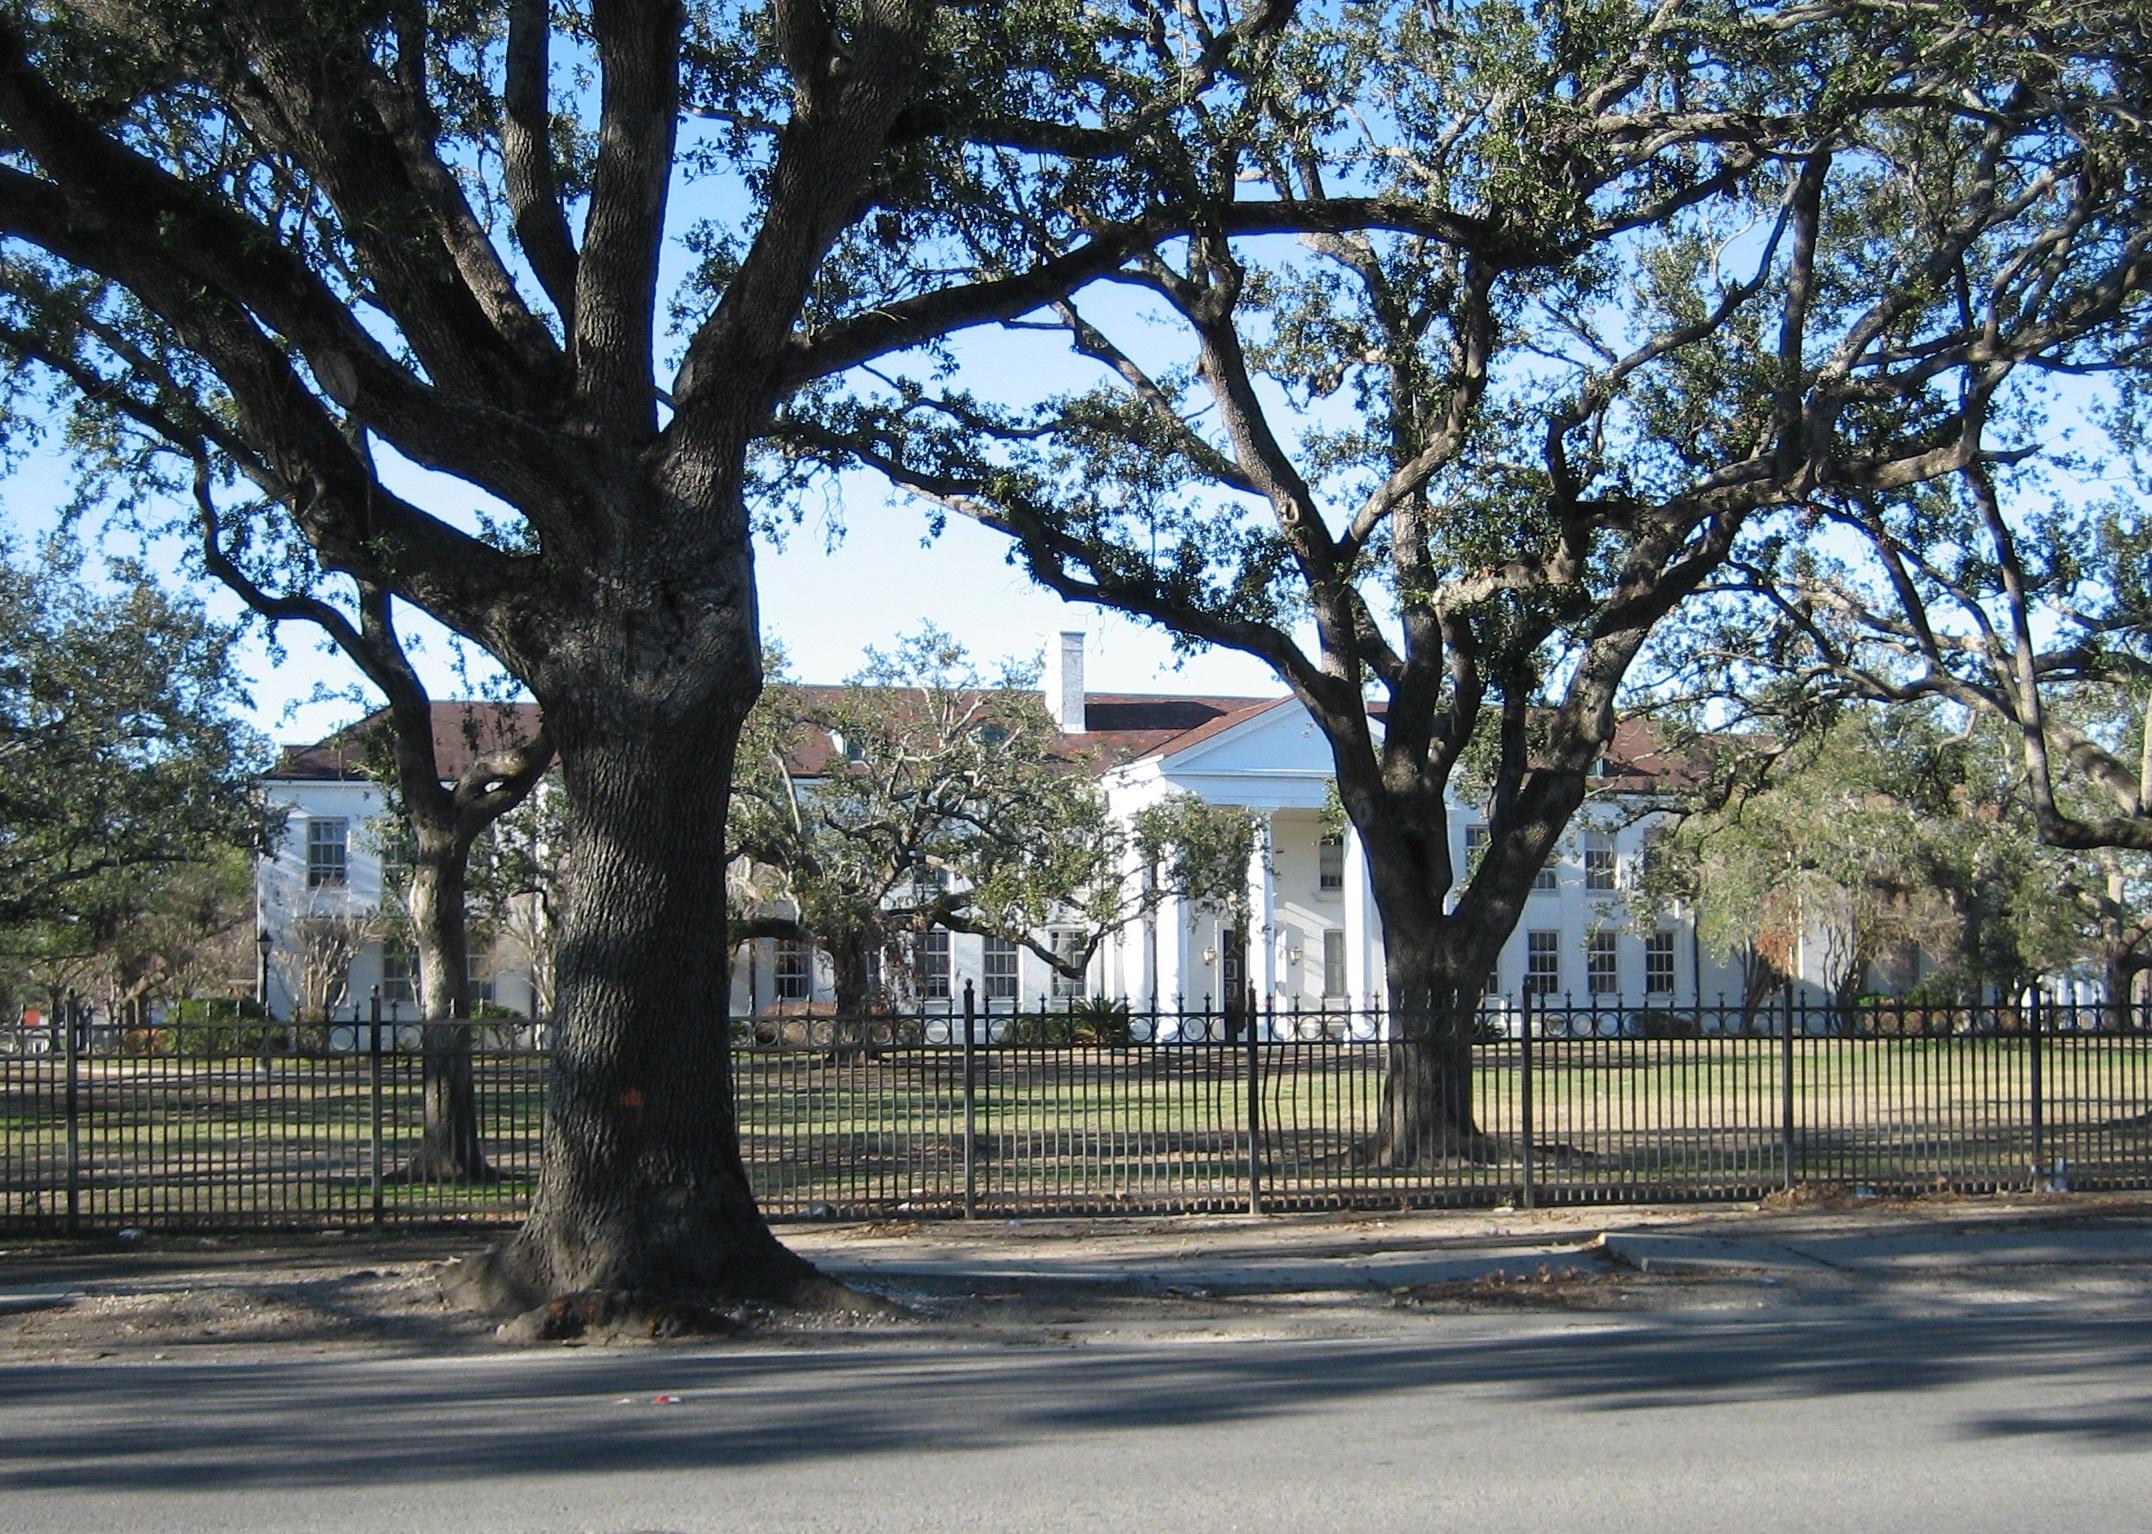 A large historic white building with an iron fence around the perimiter.